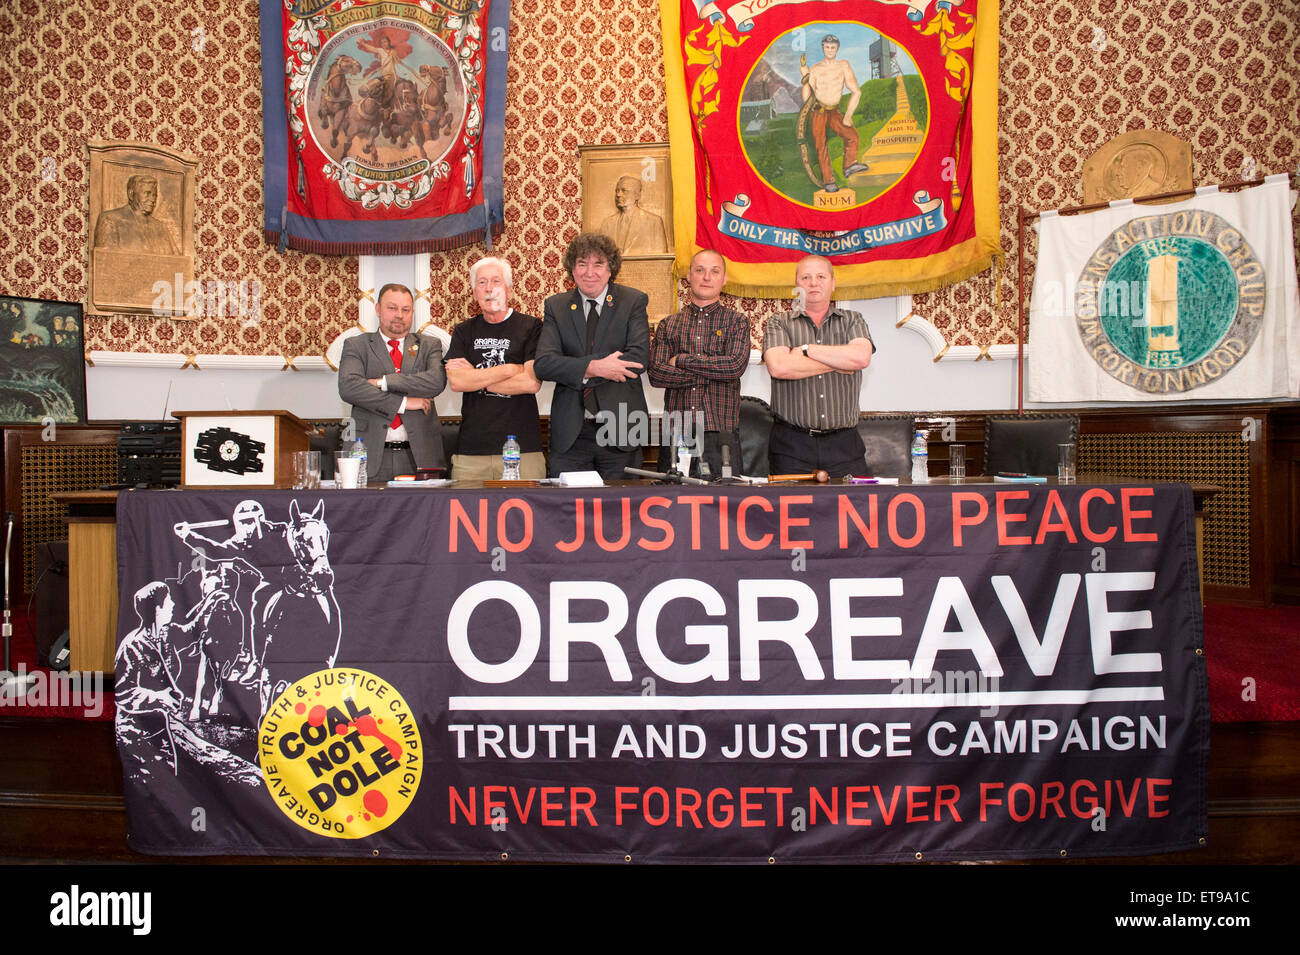 Barnsley, Yorkshire, UK. 12th June, 2015. At the Barnsley Headquarters of the NUM, Members of the Orgreave Truth and Justice Campaign release the findings of the IPCC report in to Orgreave Coking Plant in 1984. L-R Chris Kitchen (President NUM), Granville Williams (Truth and Justice Campiagn) Chris Skidmore (Yorkshire Area President, NUM), Joe Rollin (Unite the Union) Paul Winter (miner arrested at Orgreave) Credit:  Mark Harvey/Alamy Live News Stock Photo